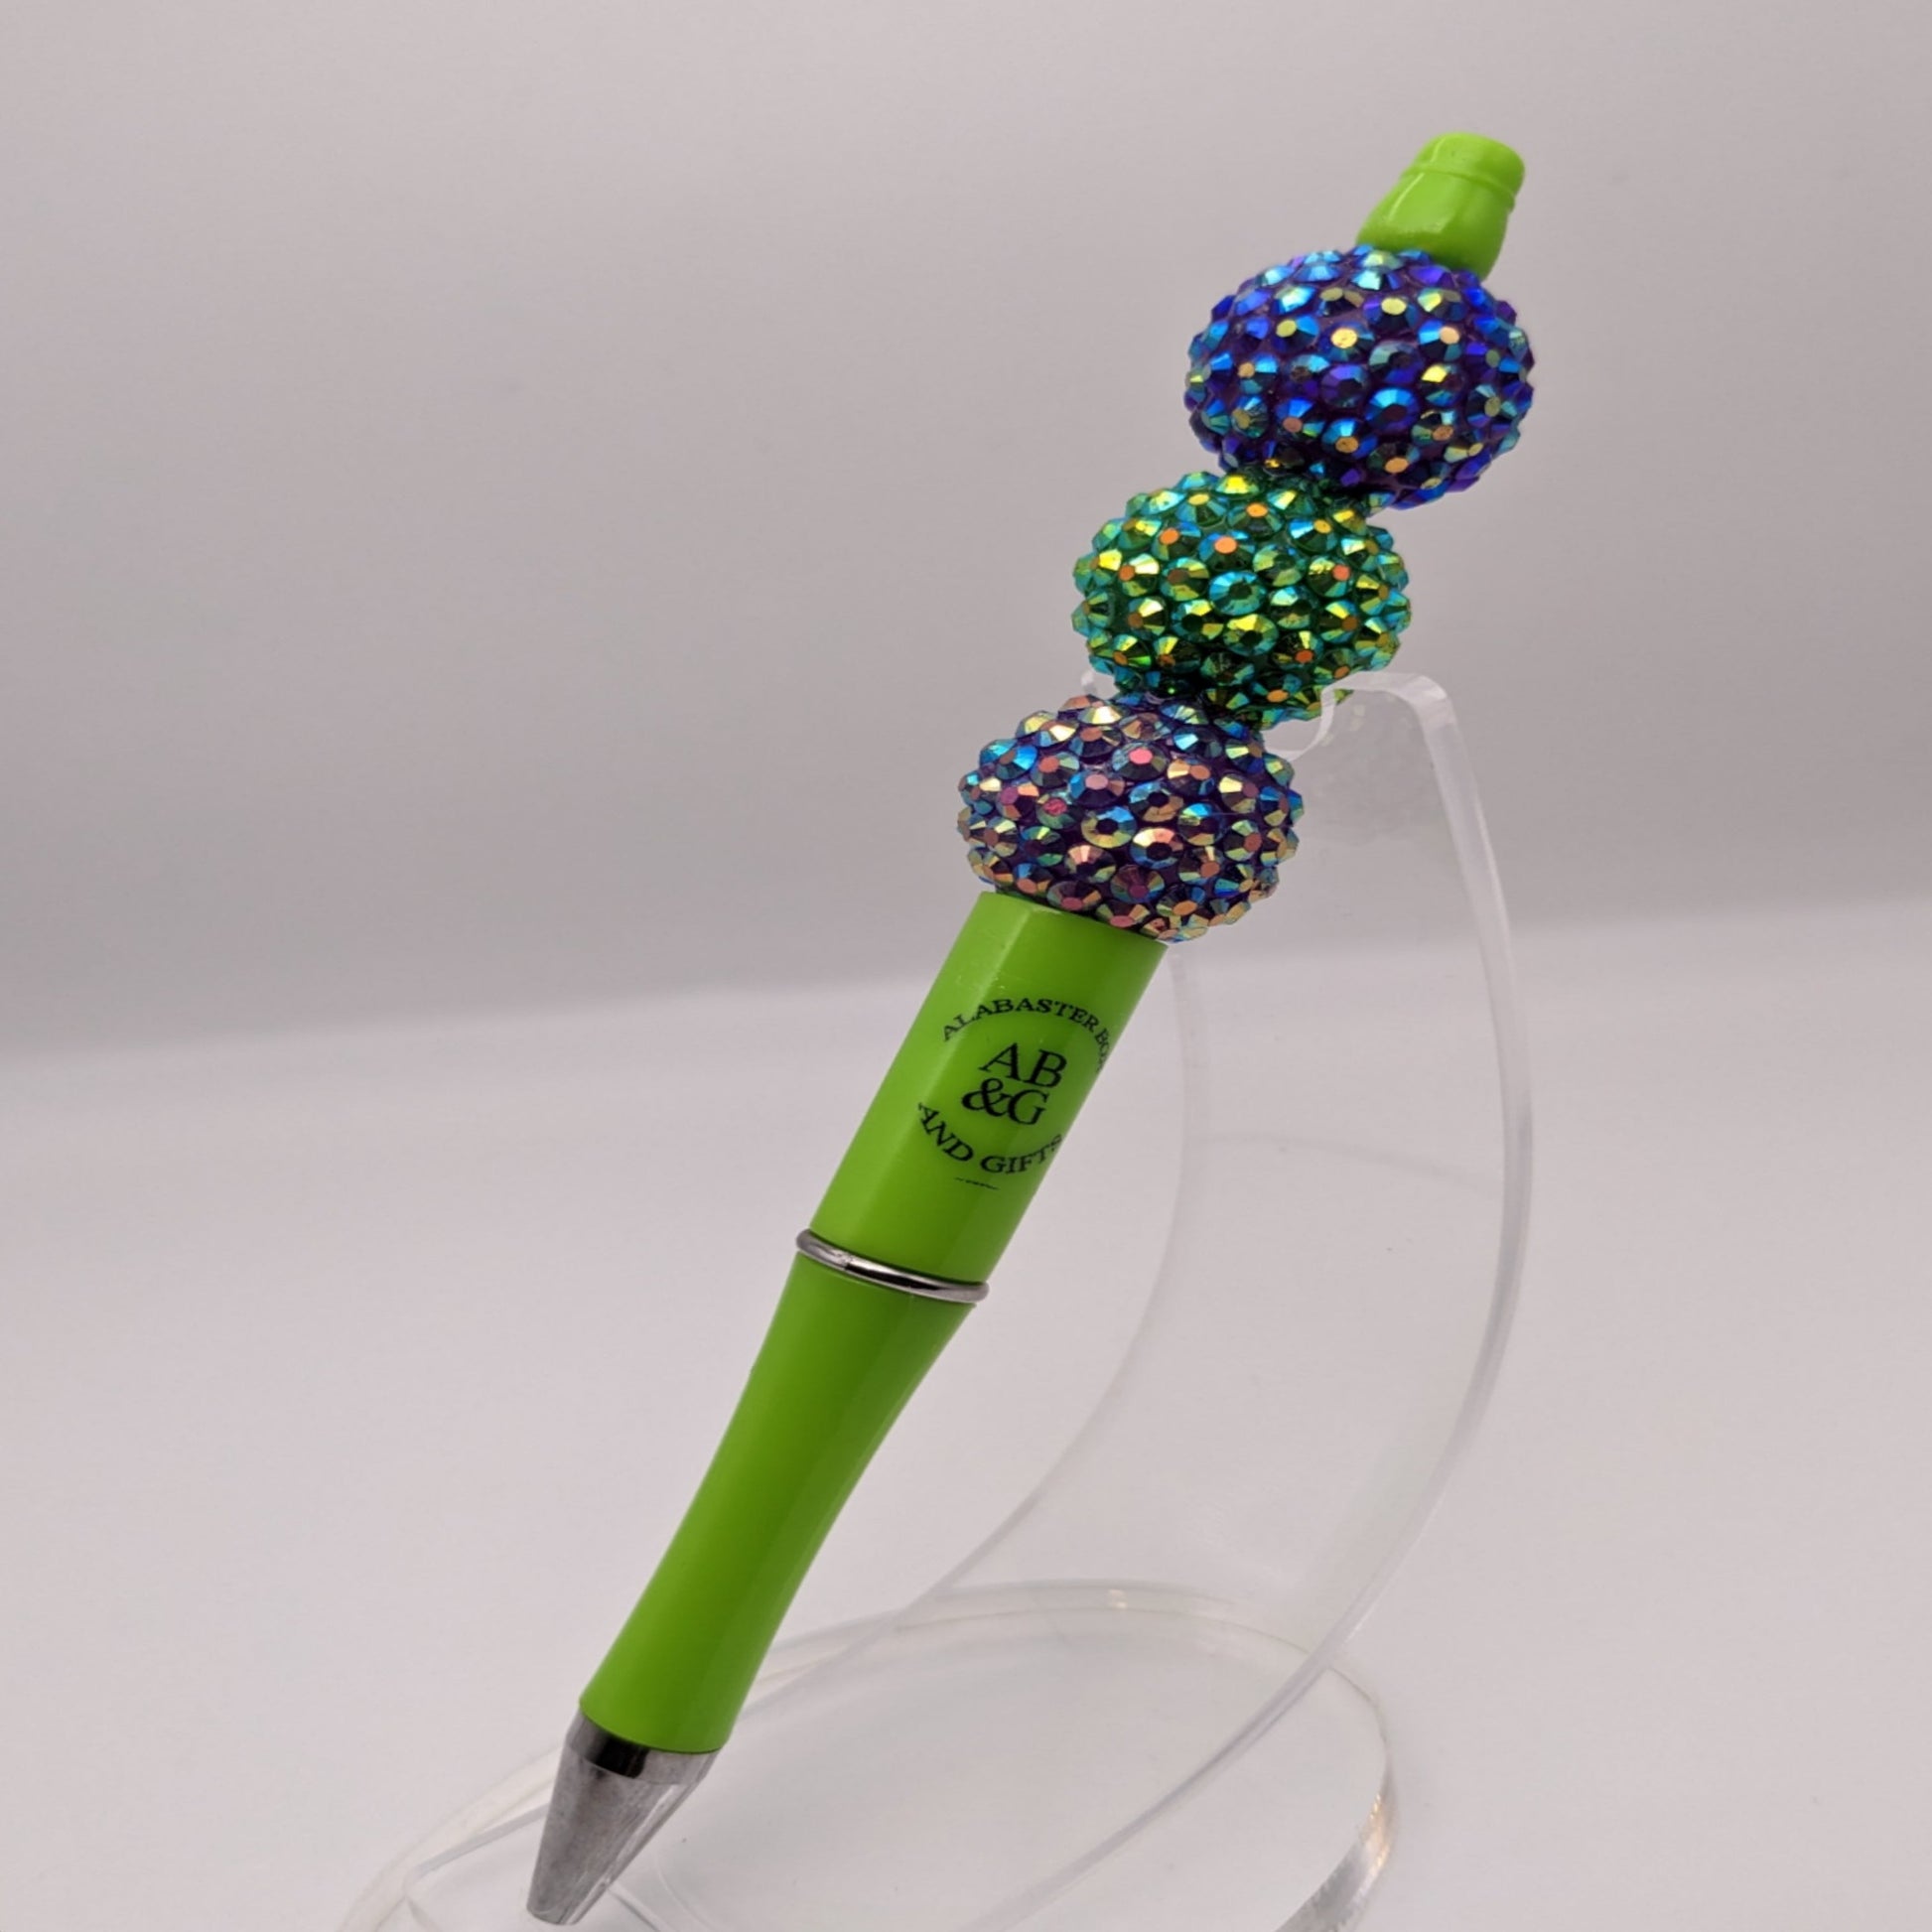 Decorative pen with beads